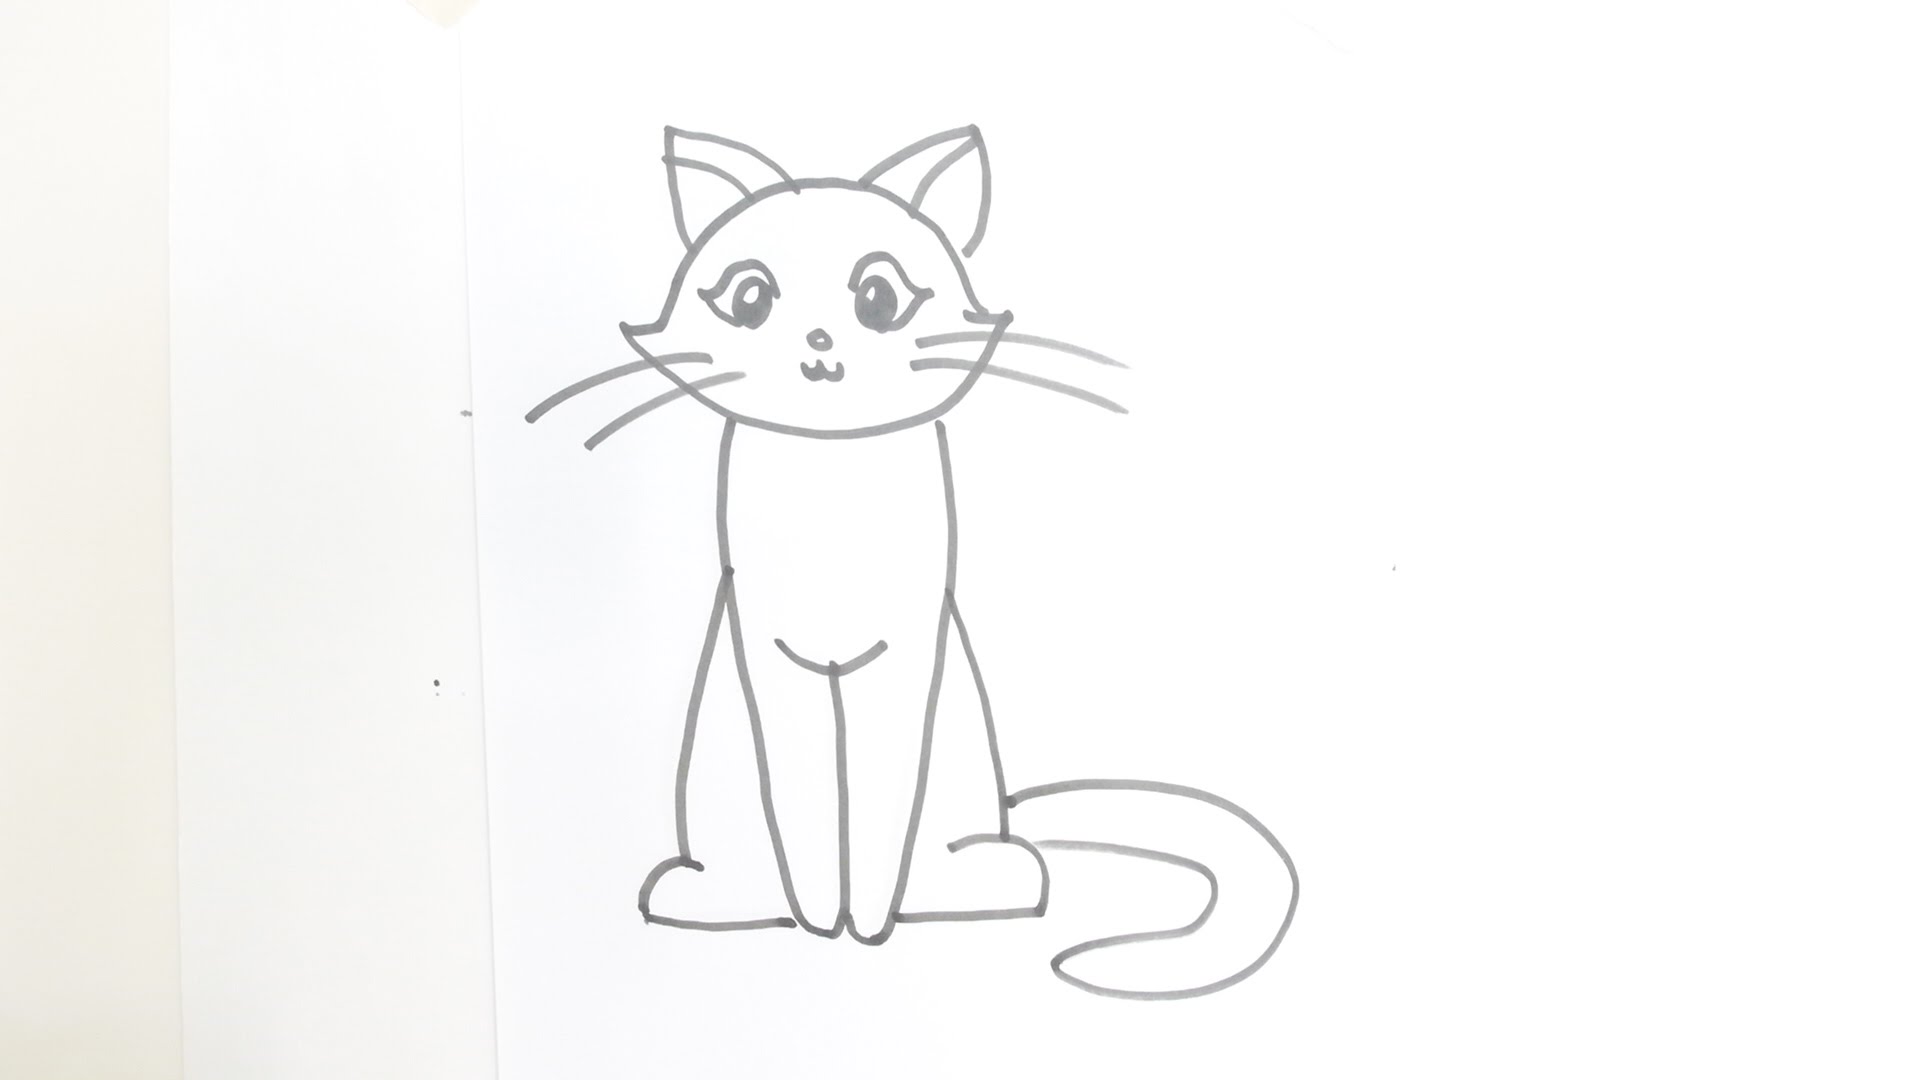 How to Draw a Cartoon Cat Sitting - YouTube